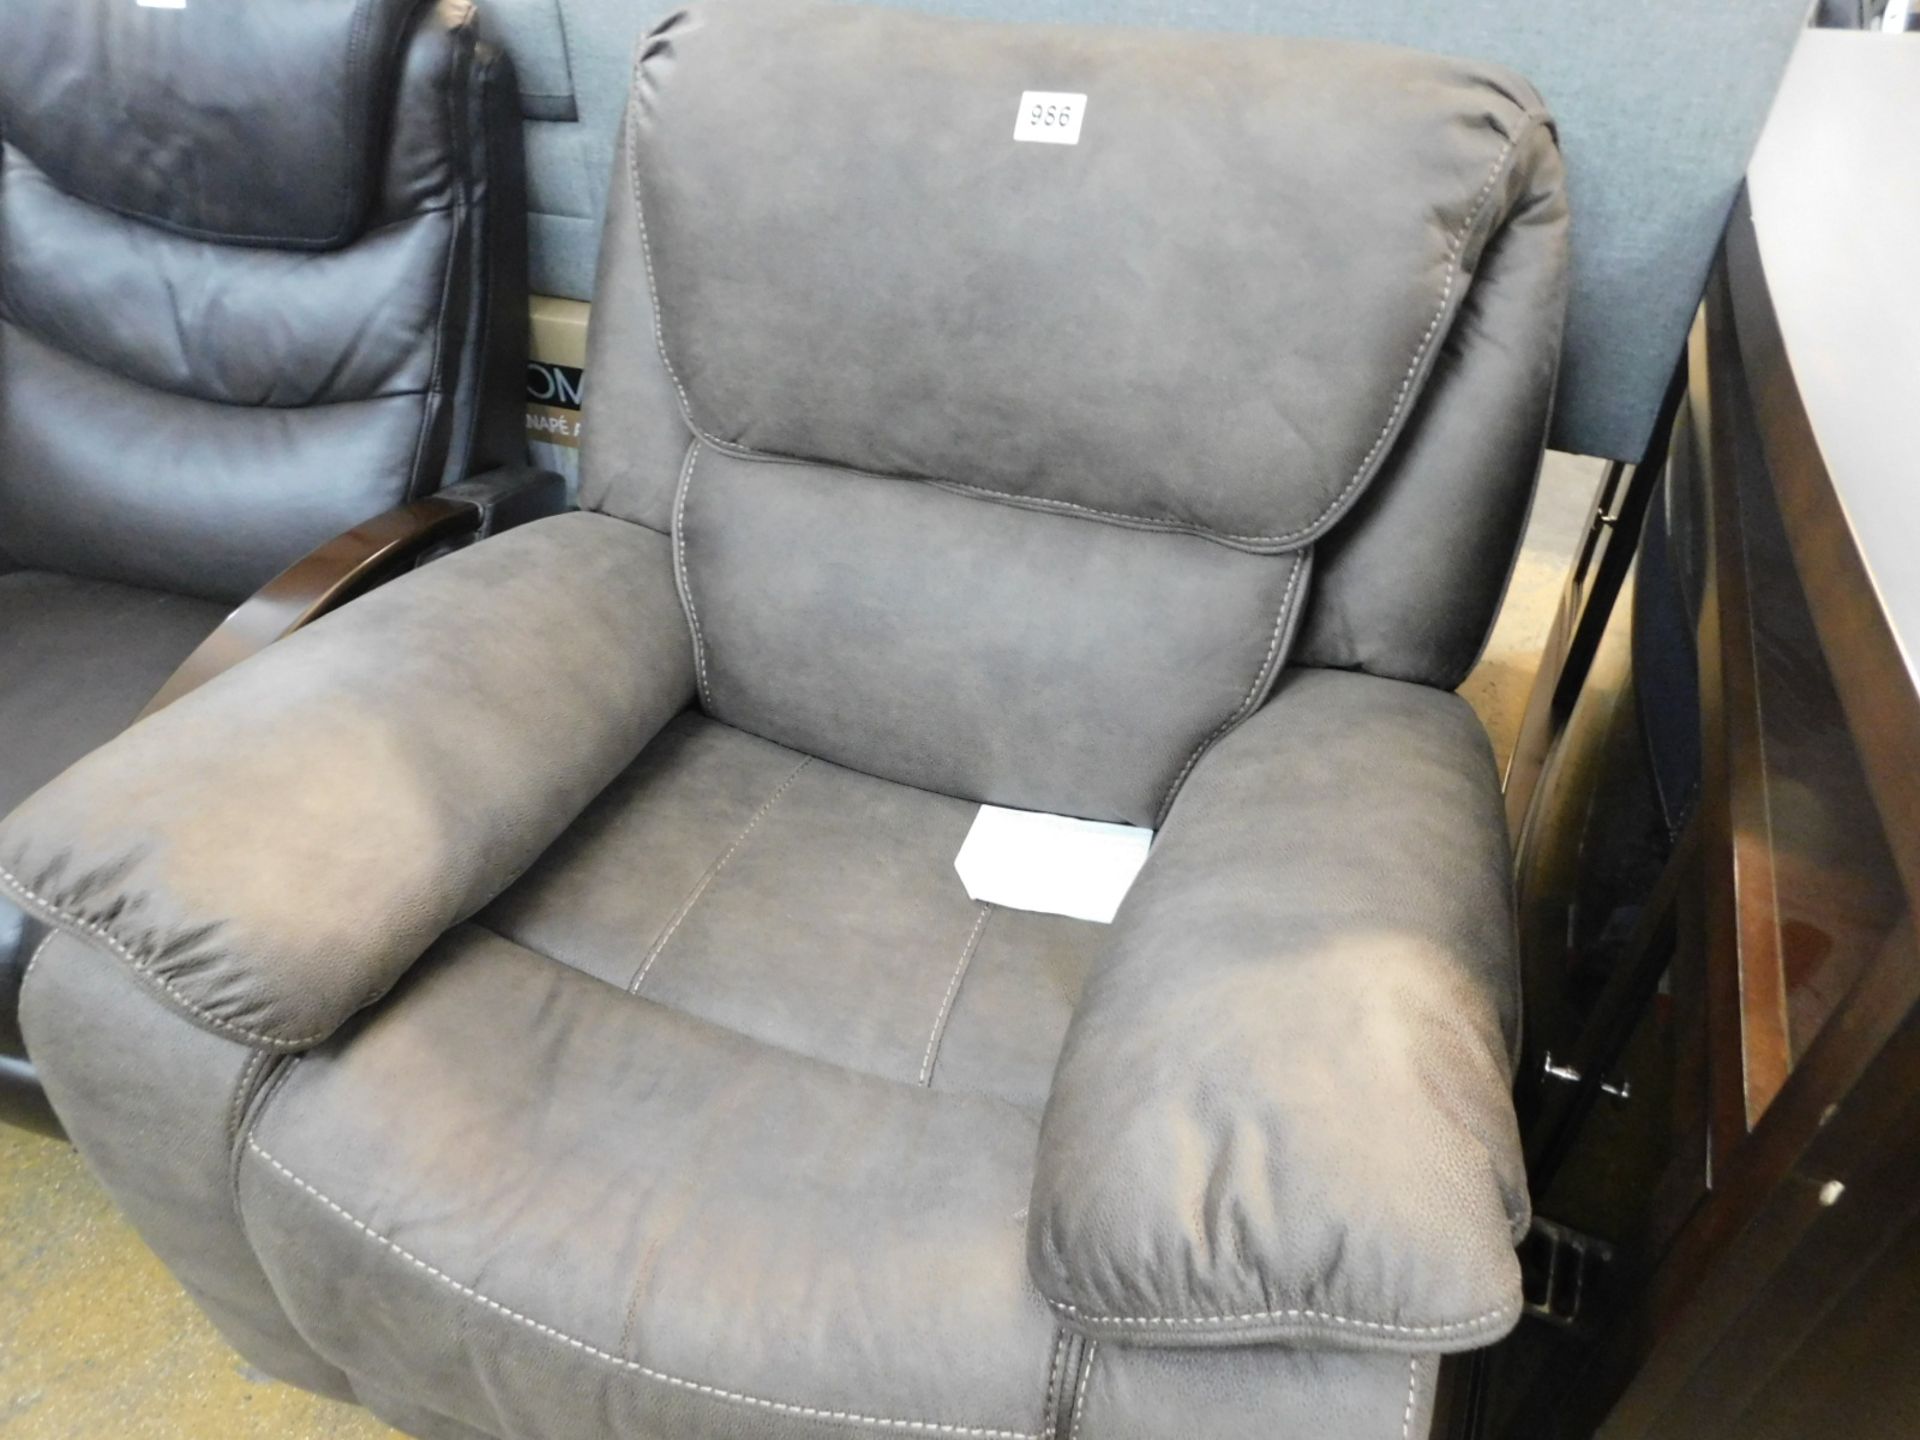 1 TRUE INNOVATIONS SUEDE LEATHER ROCKER RECLINER CHAIR RRP £299